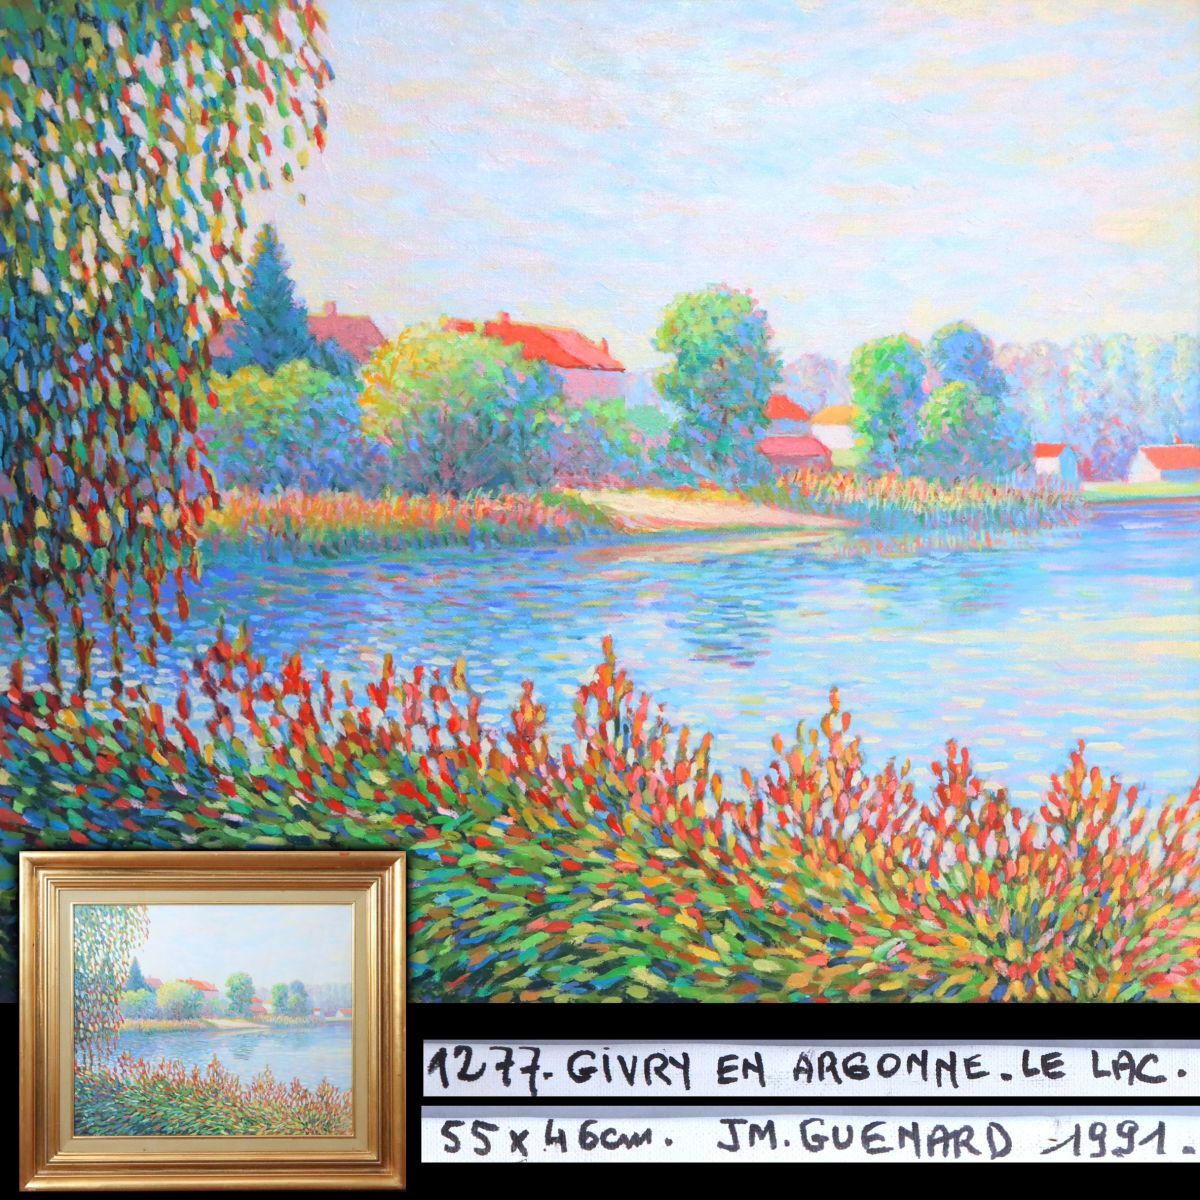 [1551170] [Authentic work] Jean-Michel Guenard oil painting Lake of Argon 10F 1991 Autographed Framed ◆ Landscape painting / Western painting / Painting / Fine art / Antiques / Antiques, painting, oil painting, Nature, Landscape painting